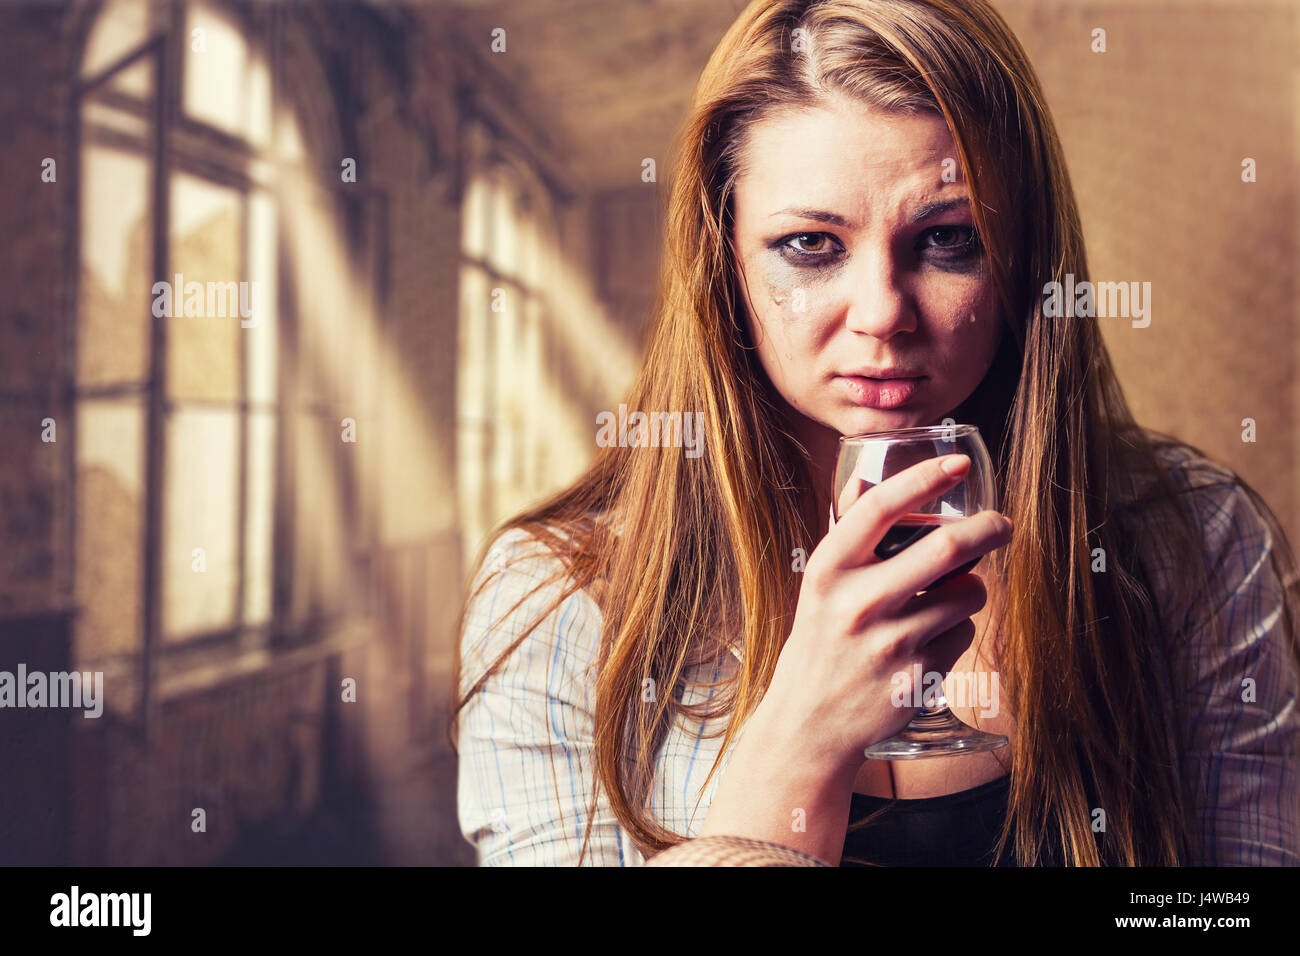 Young beautiful woman in depression, drinking alcohol Stock Photo